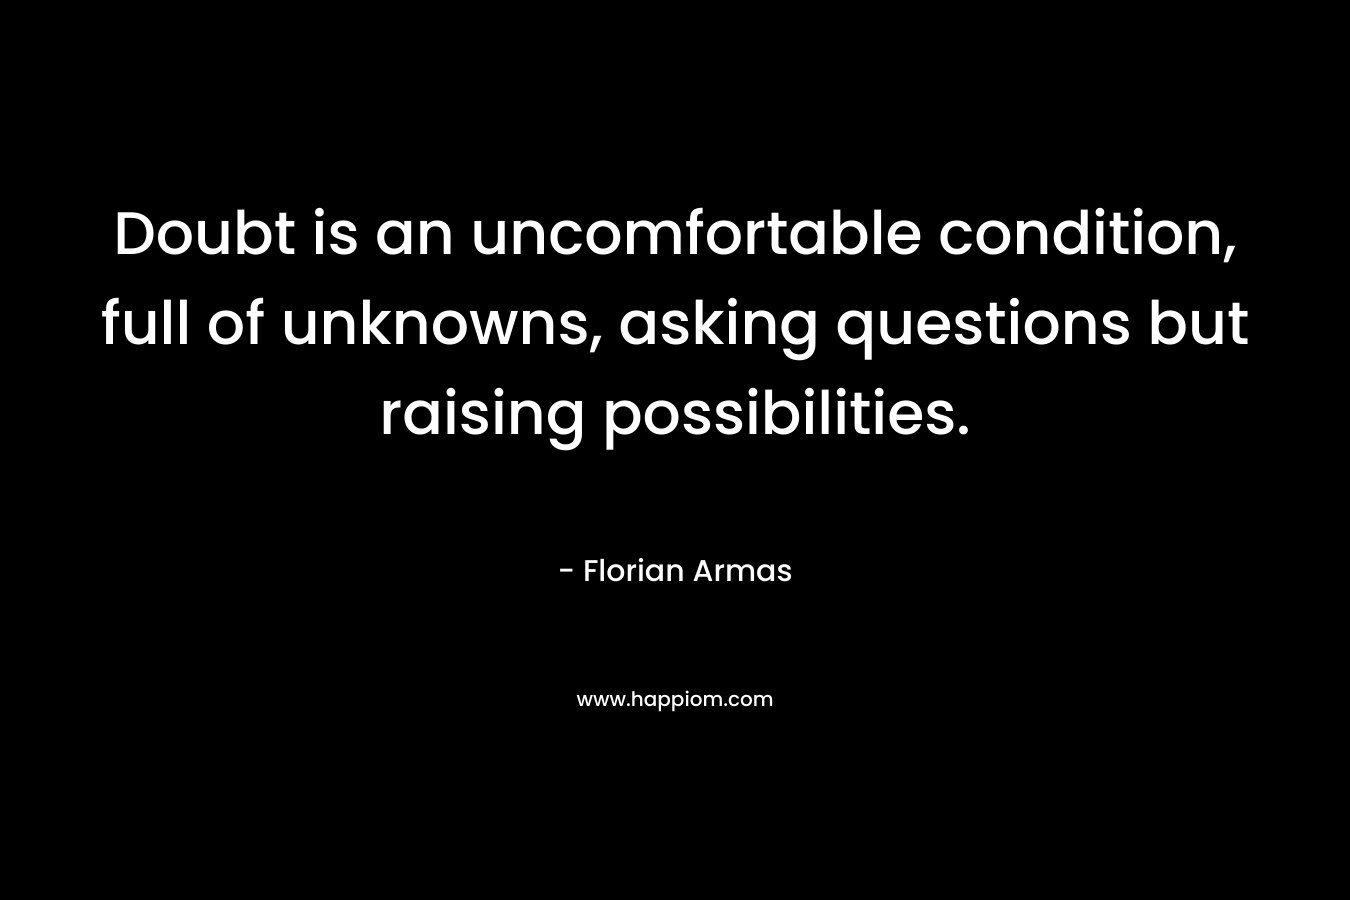 Doubt is an uncomfortable condition, full of unknowns, asking questions but raising possibilities. – Florian Armas